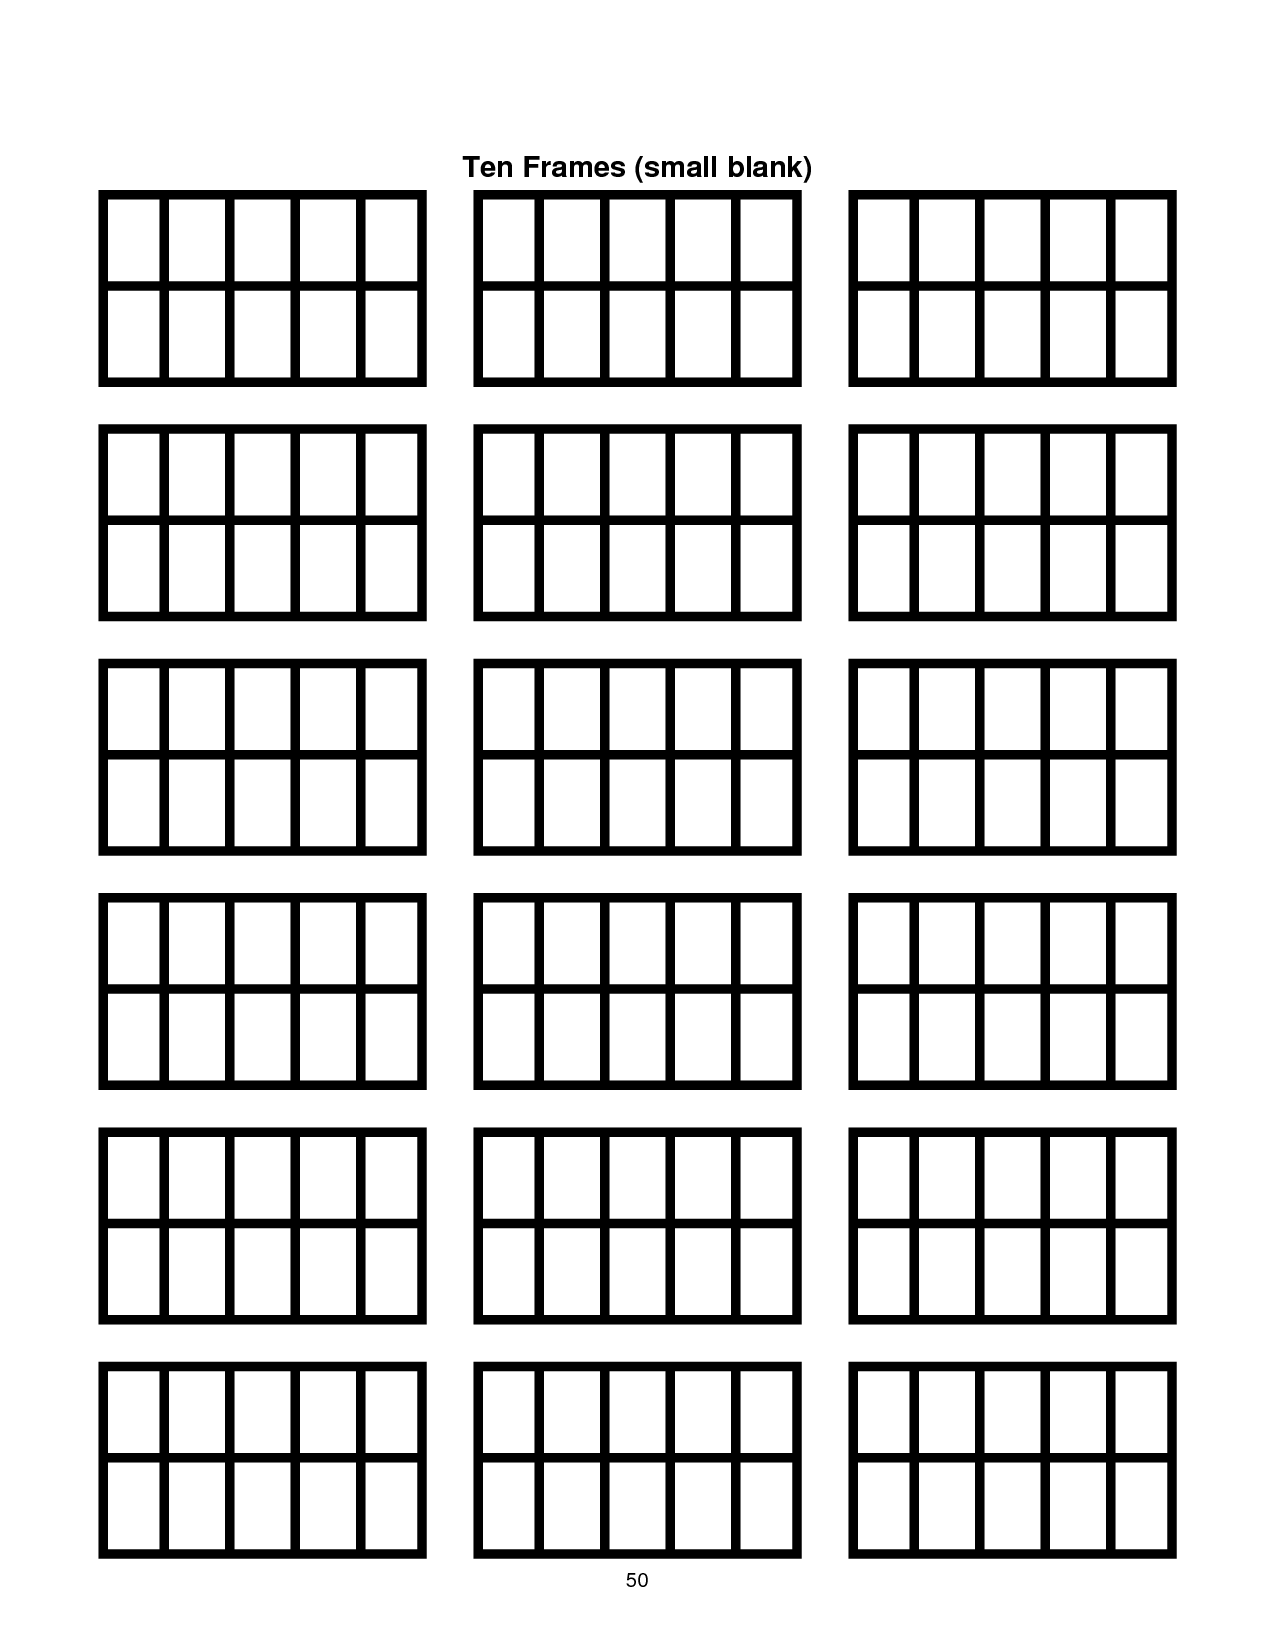 6-best-images-of-free-printable-tens-frames-templates-blank-ten